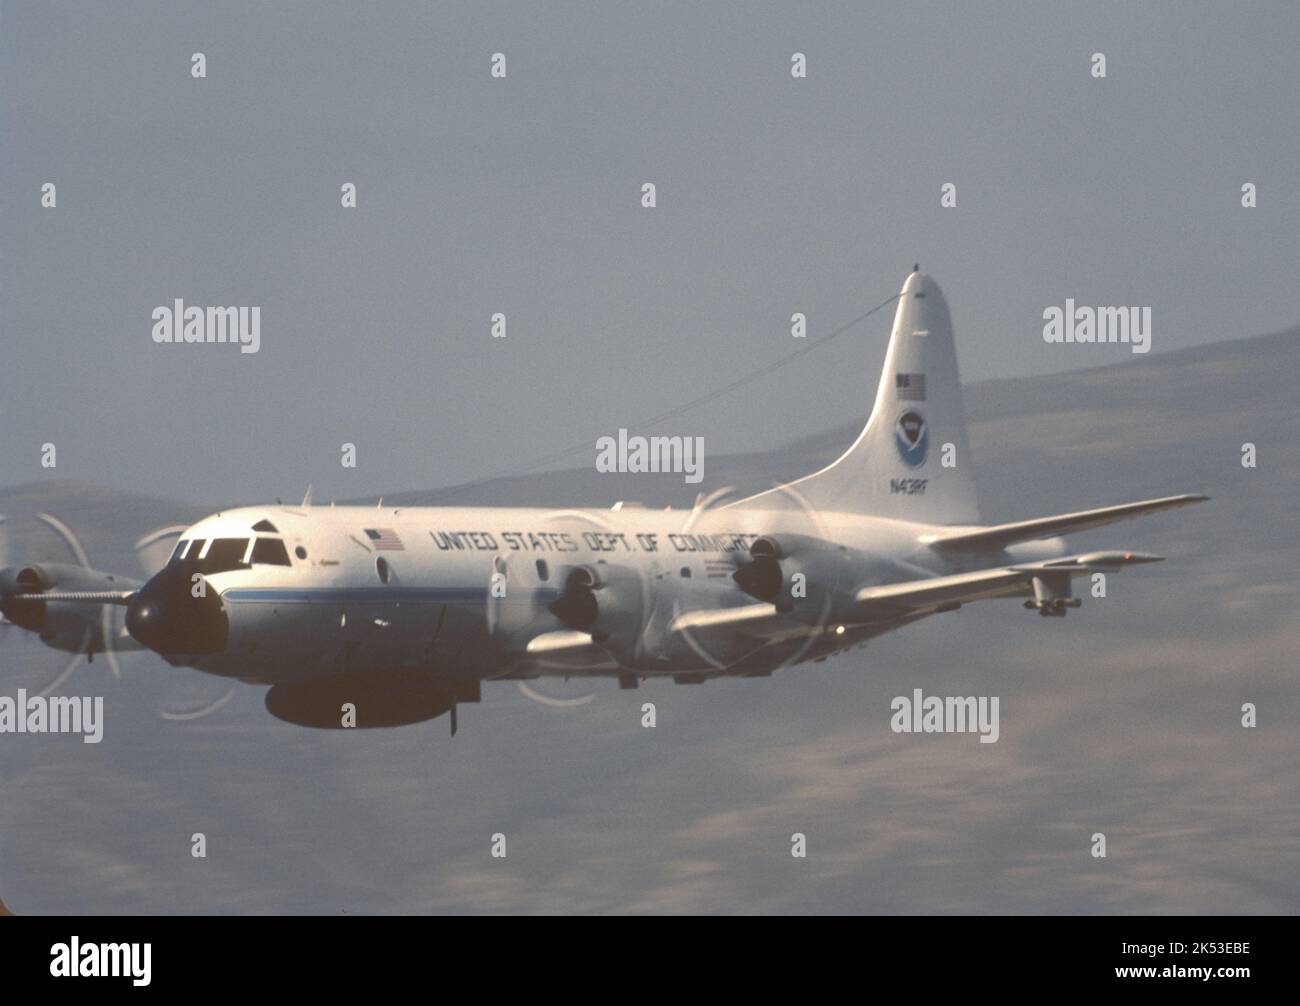 Lockheed P3 Orion operated by United States Department of Commerce makes a fast pass down the runway Stock Photo